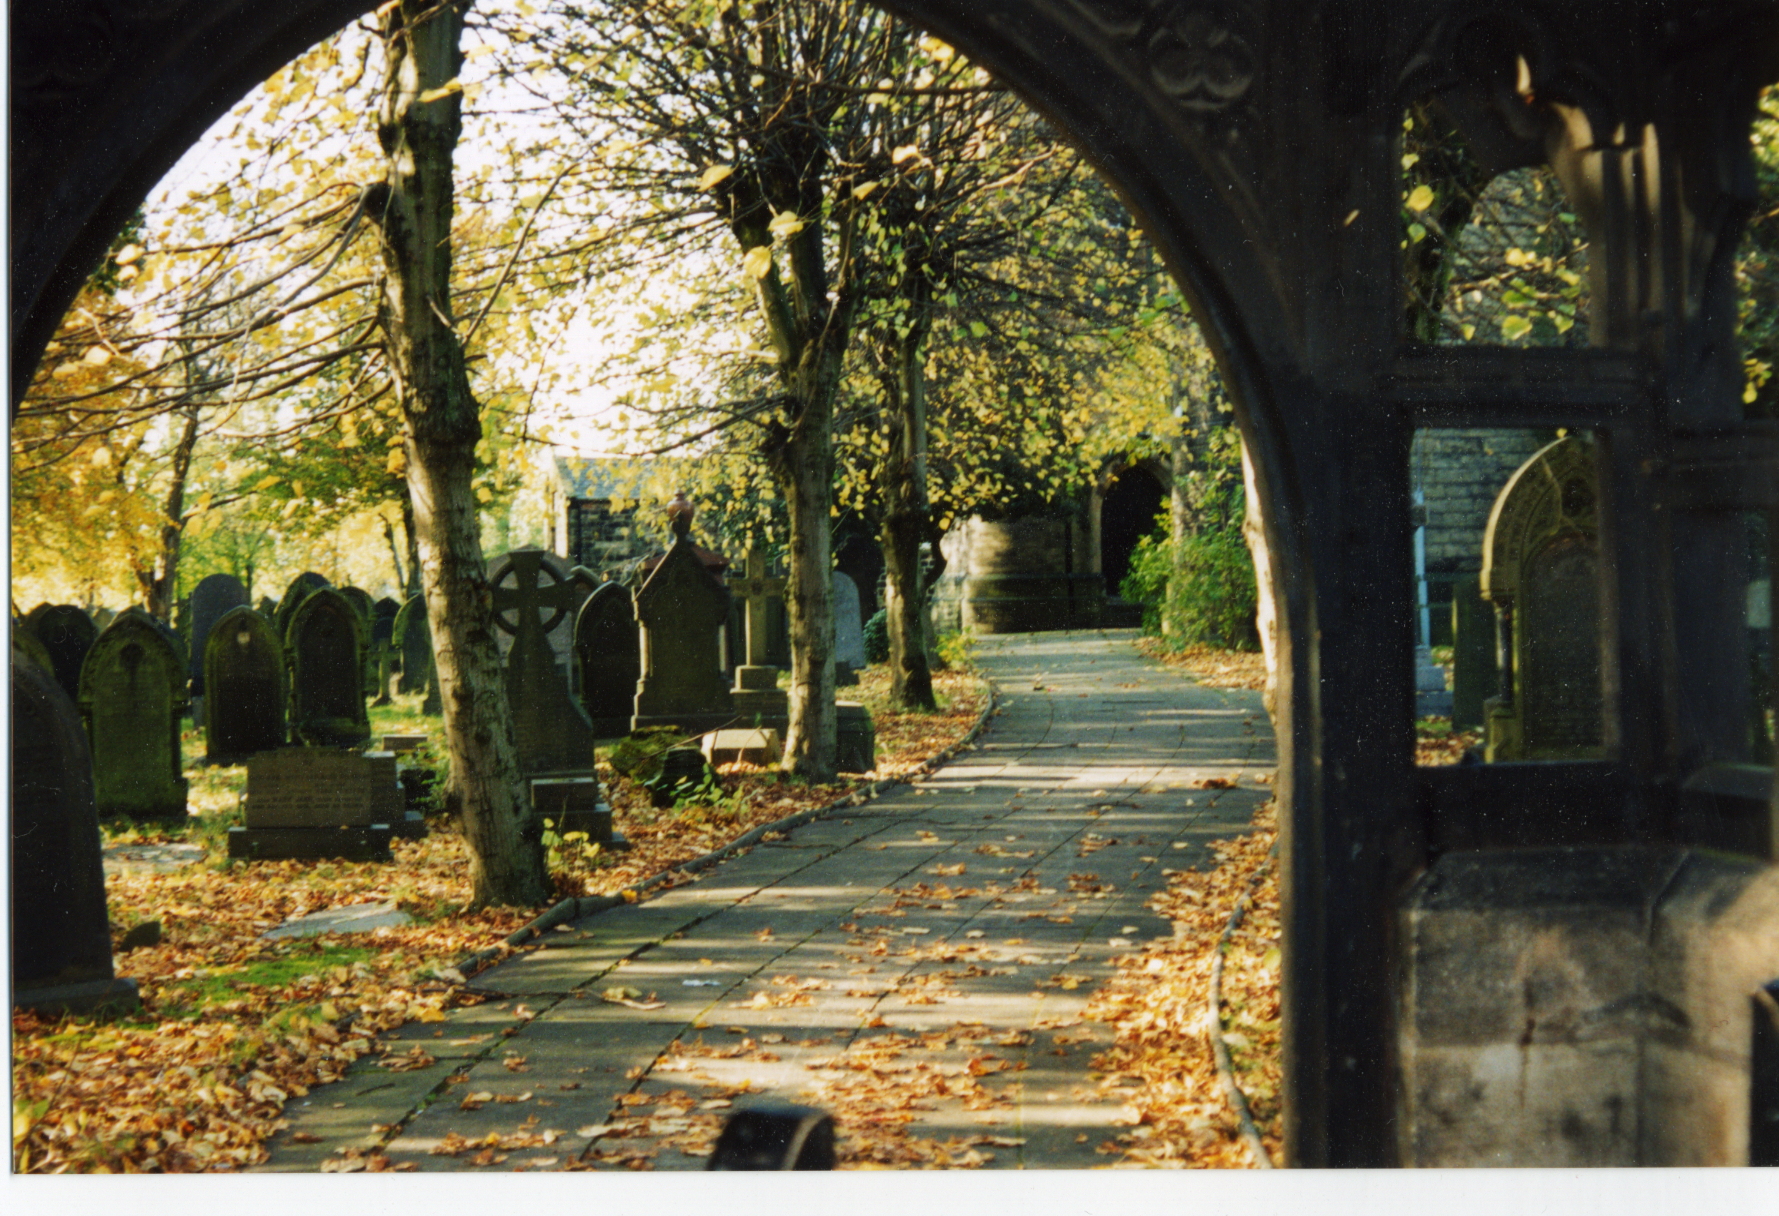 View of lychgate and graveyard